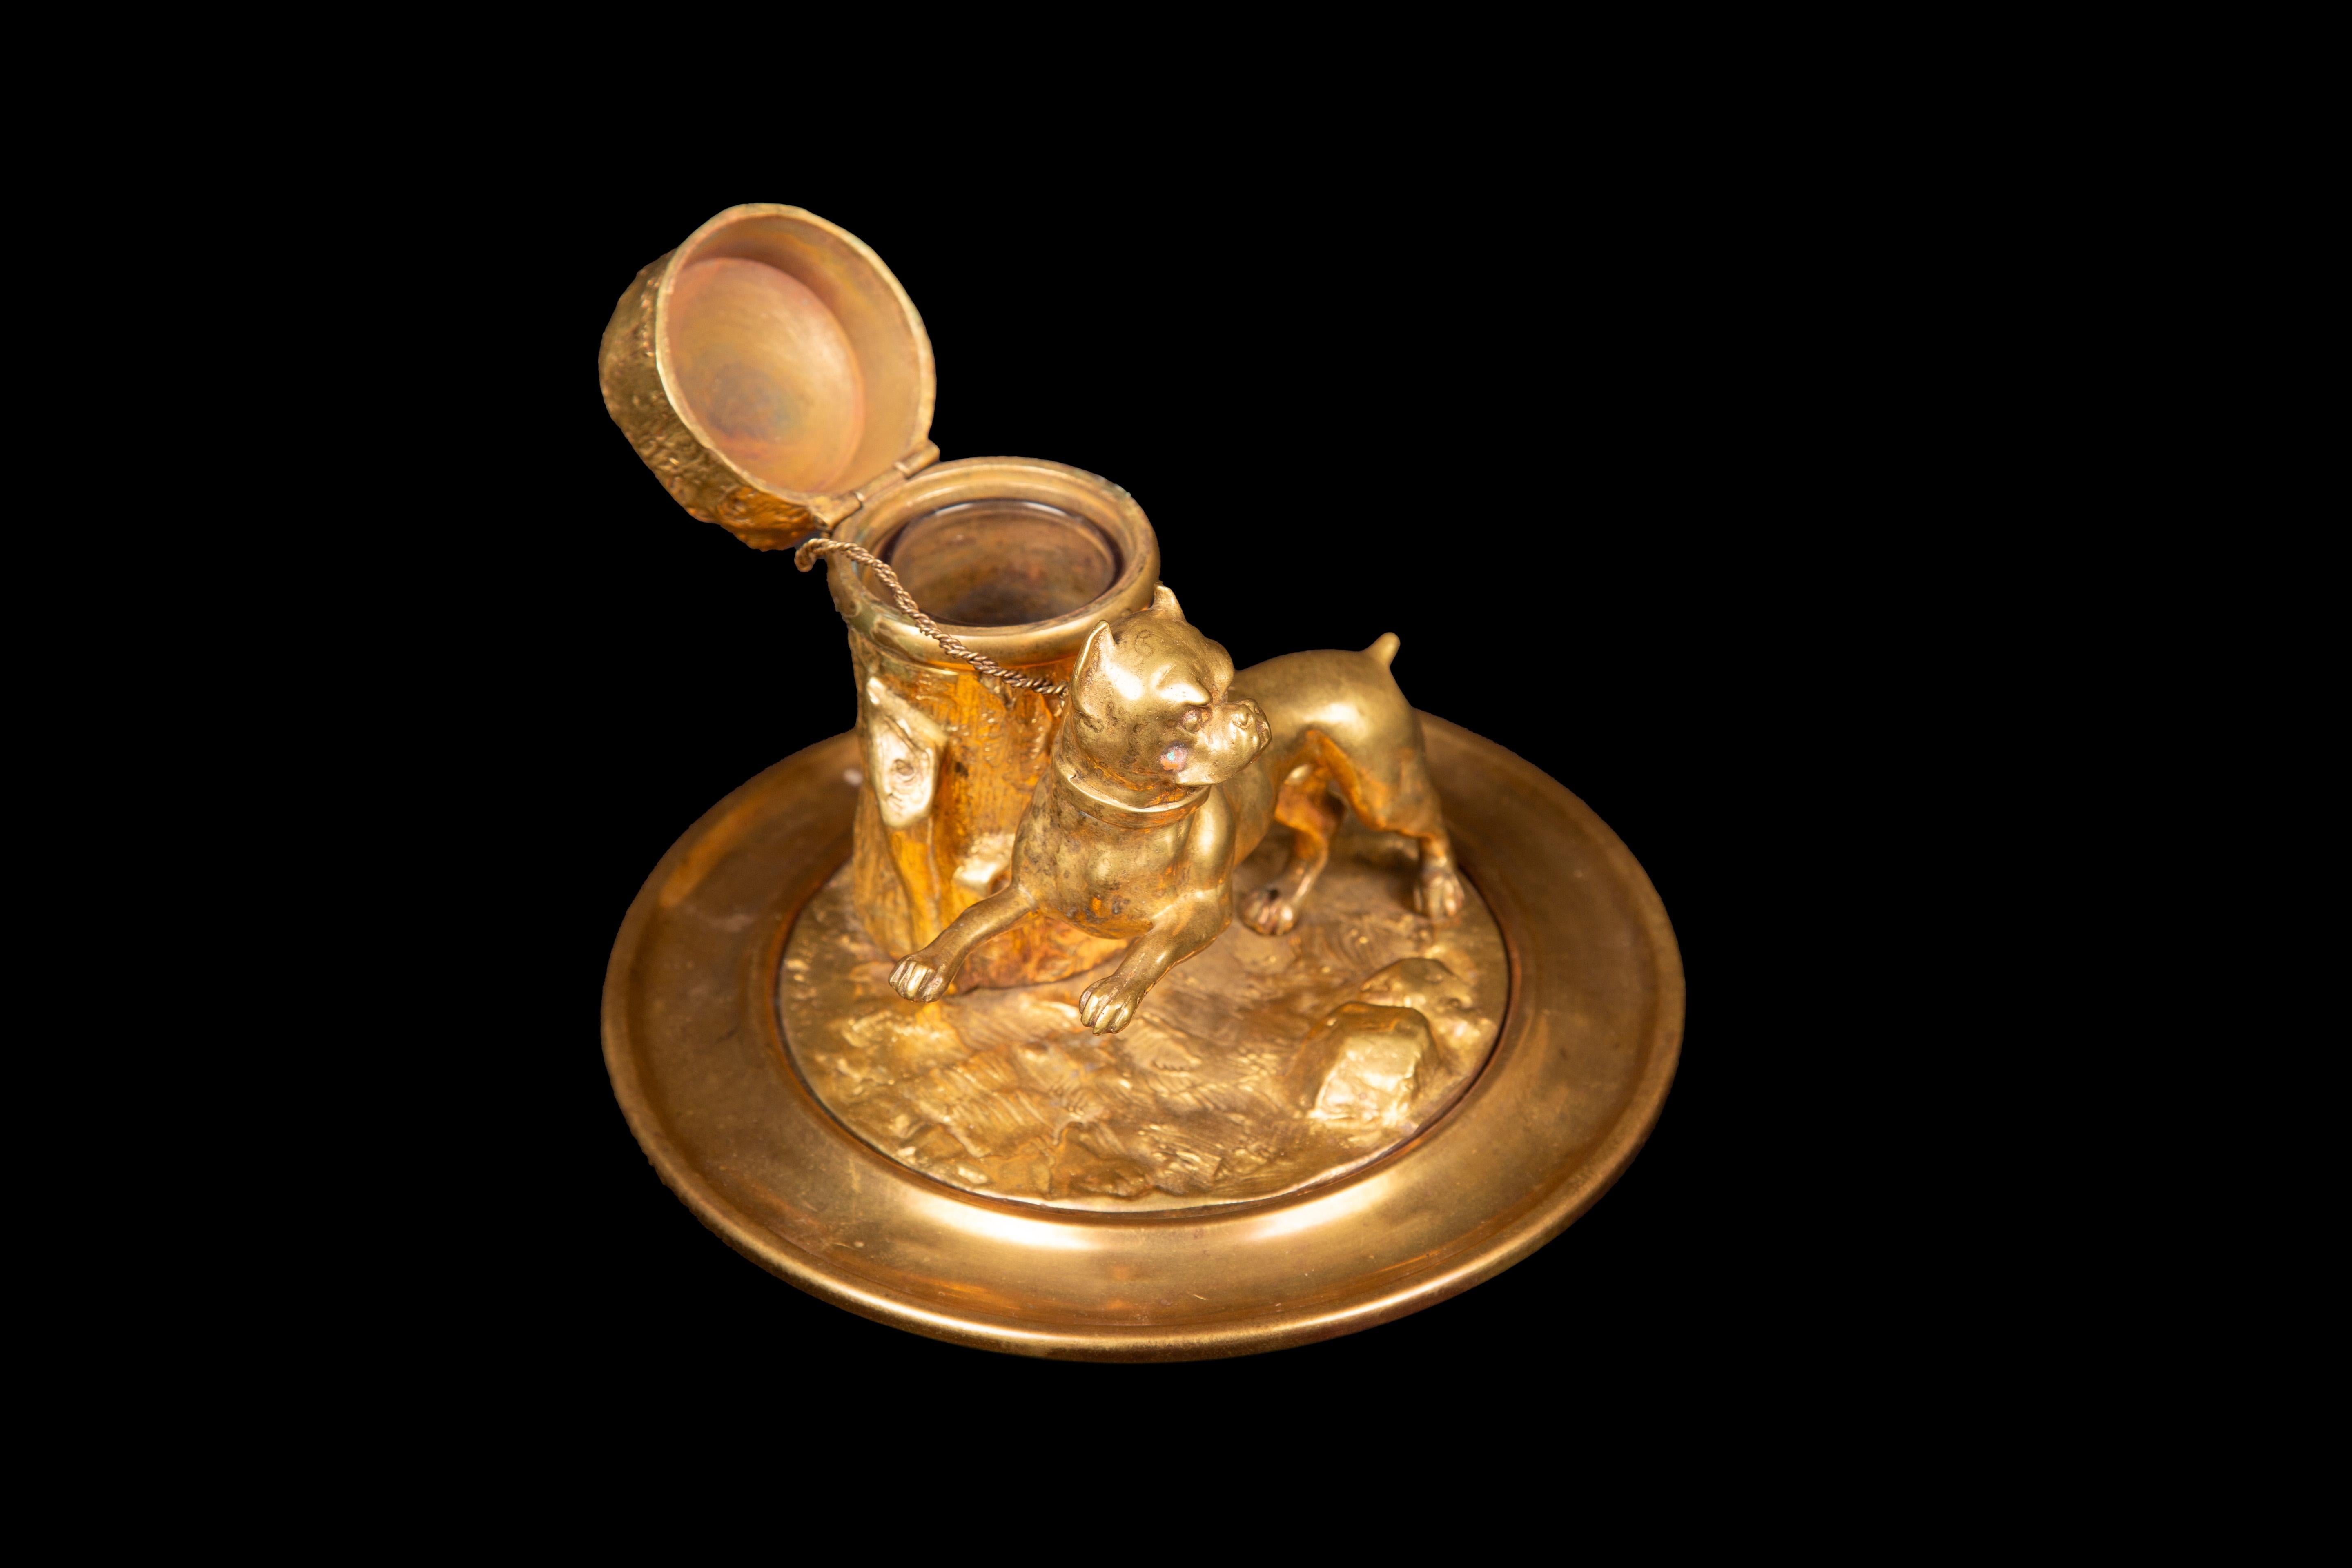 Napoleon III 19th Century Gilded Inkwell Depicting a Bulldog Tied to Tree Stump For Sale